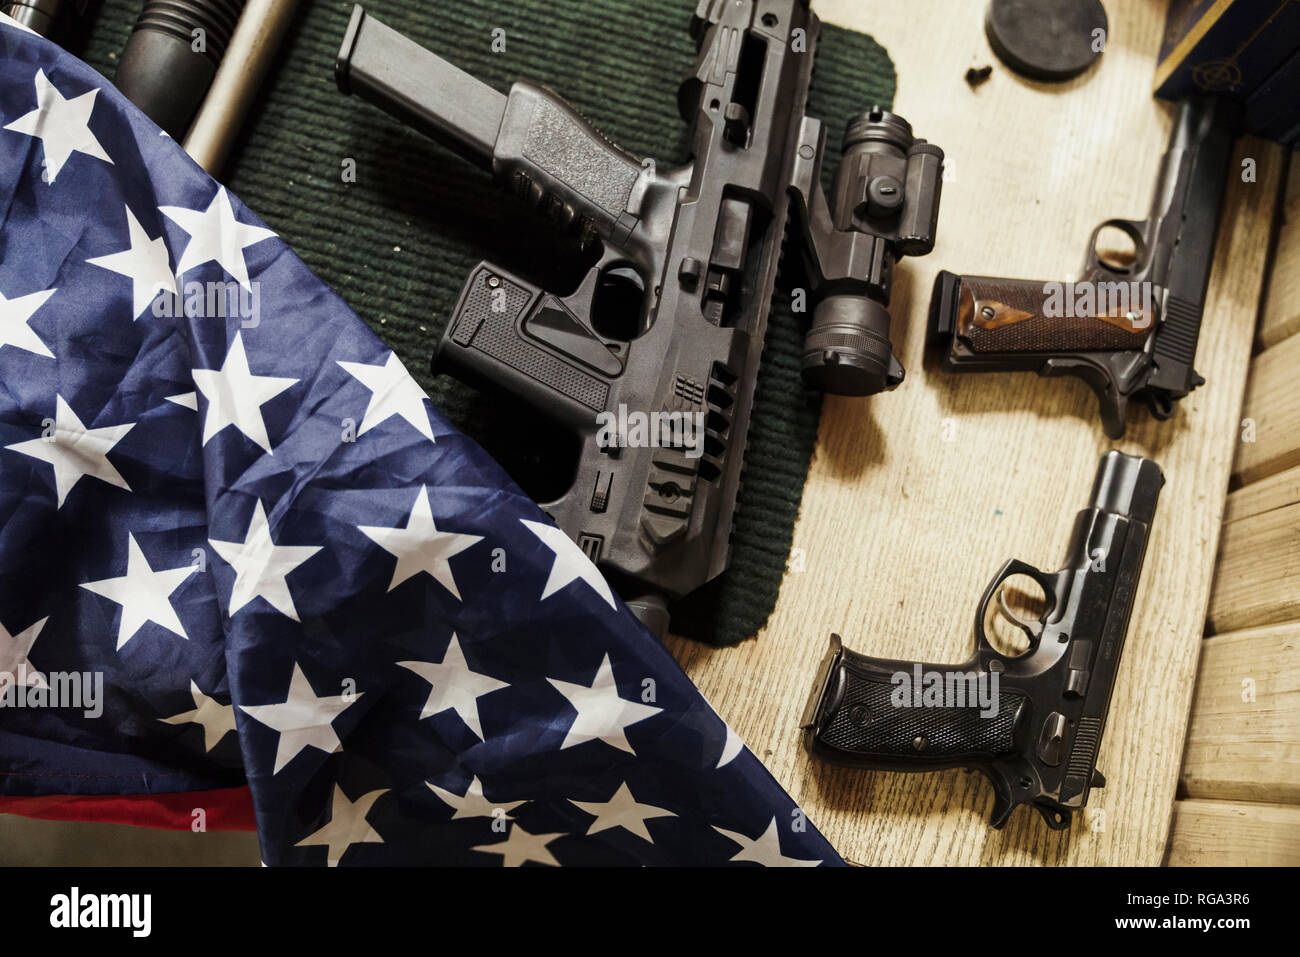 Rifles, guns and American flag on table Stock Photo